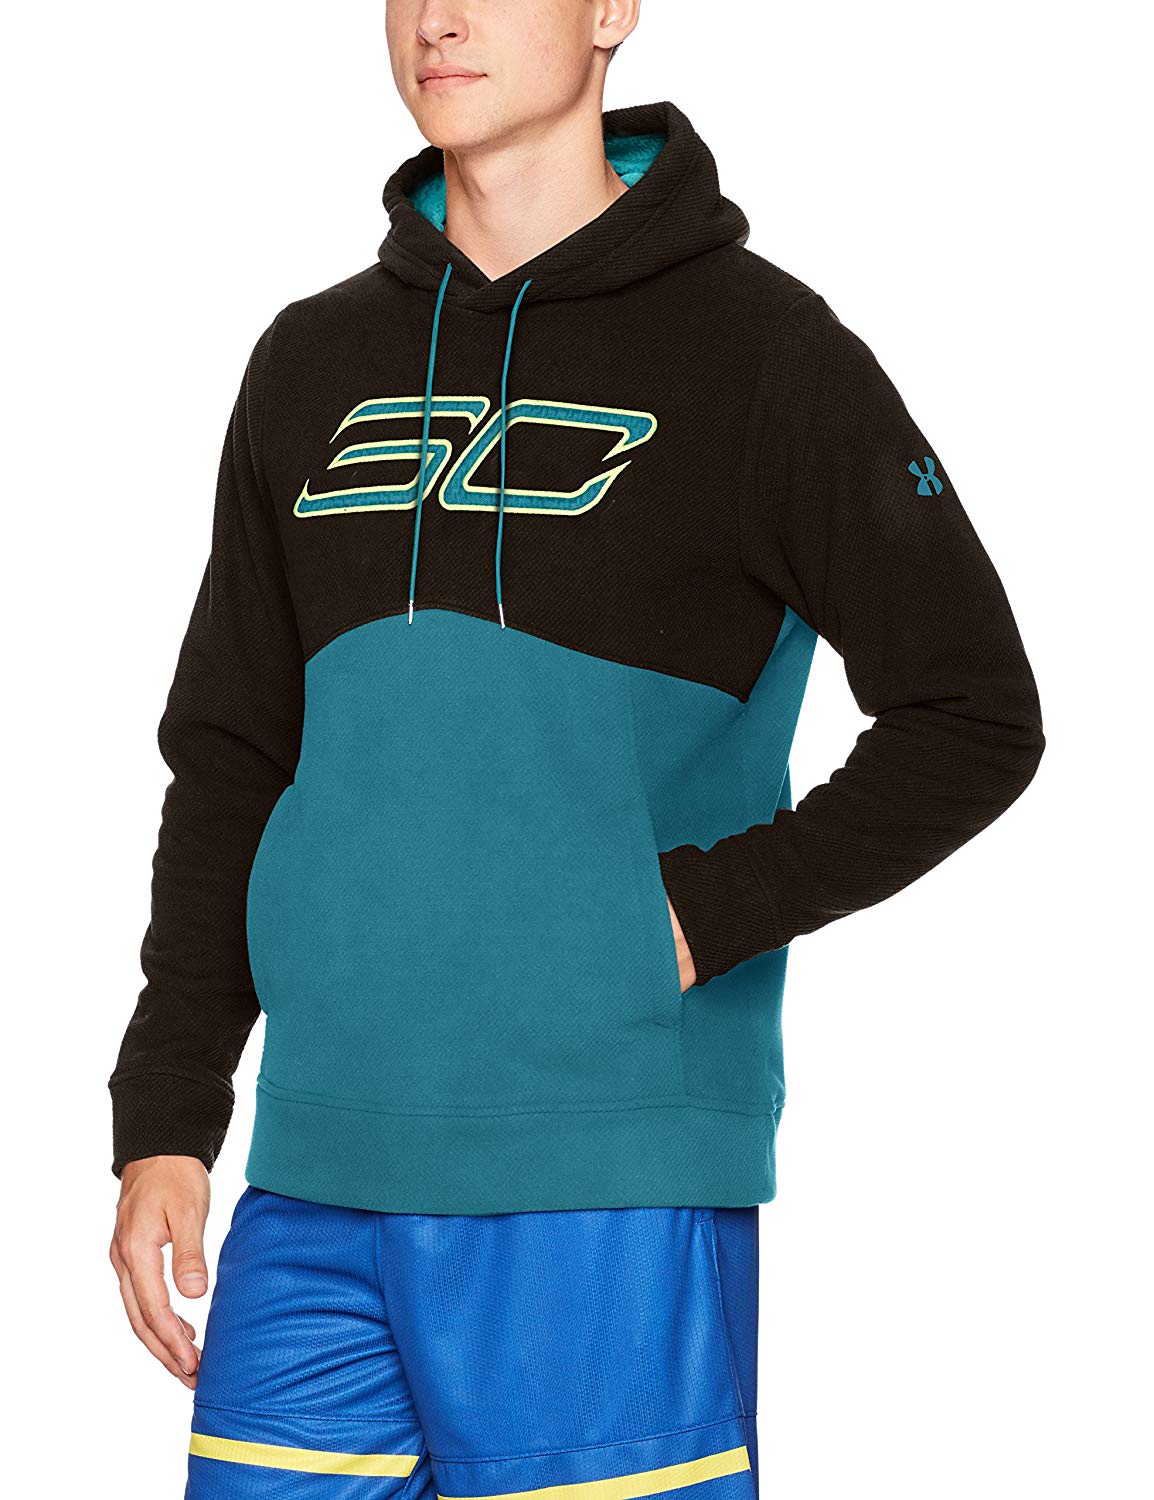 Under Armour Jackets Logo - Under Armour Mens SC30 Logo Hoodie: Sports & Outdoors